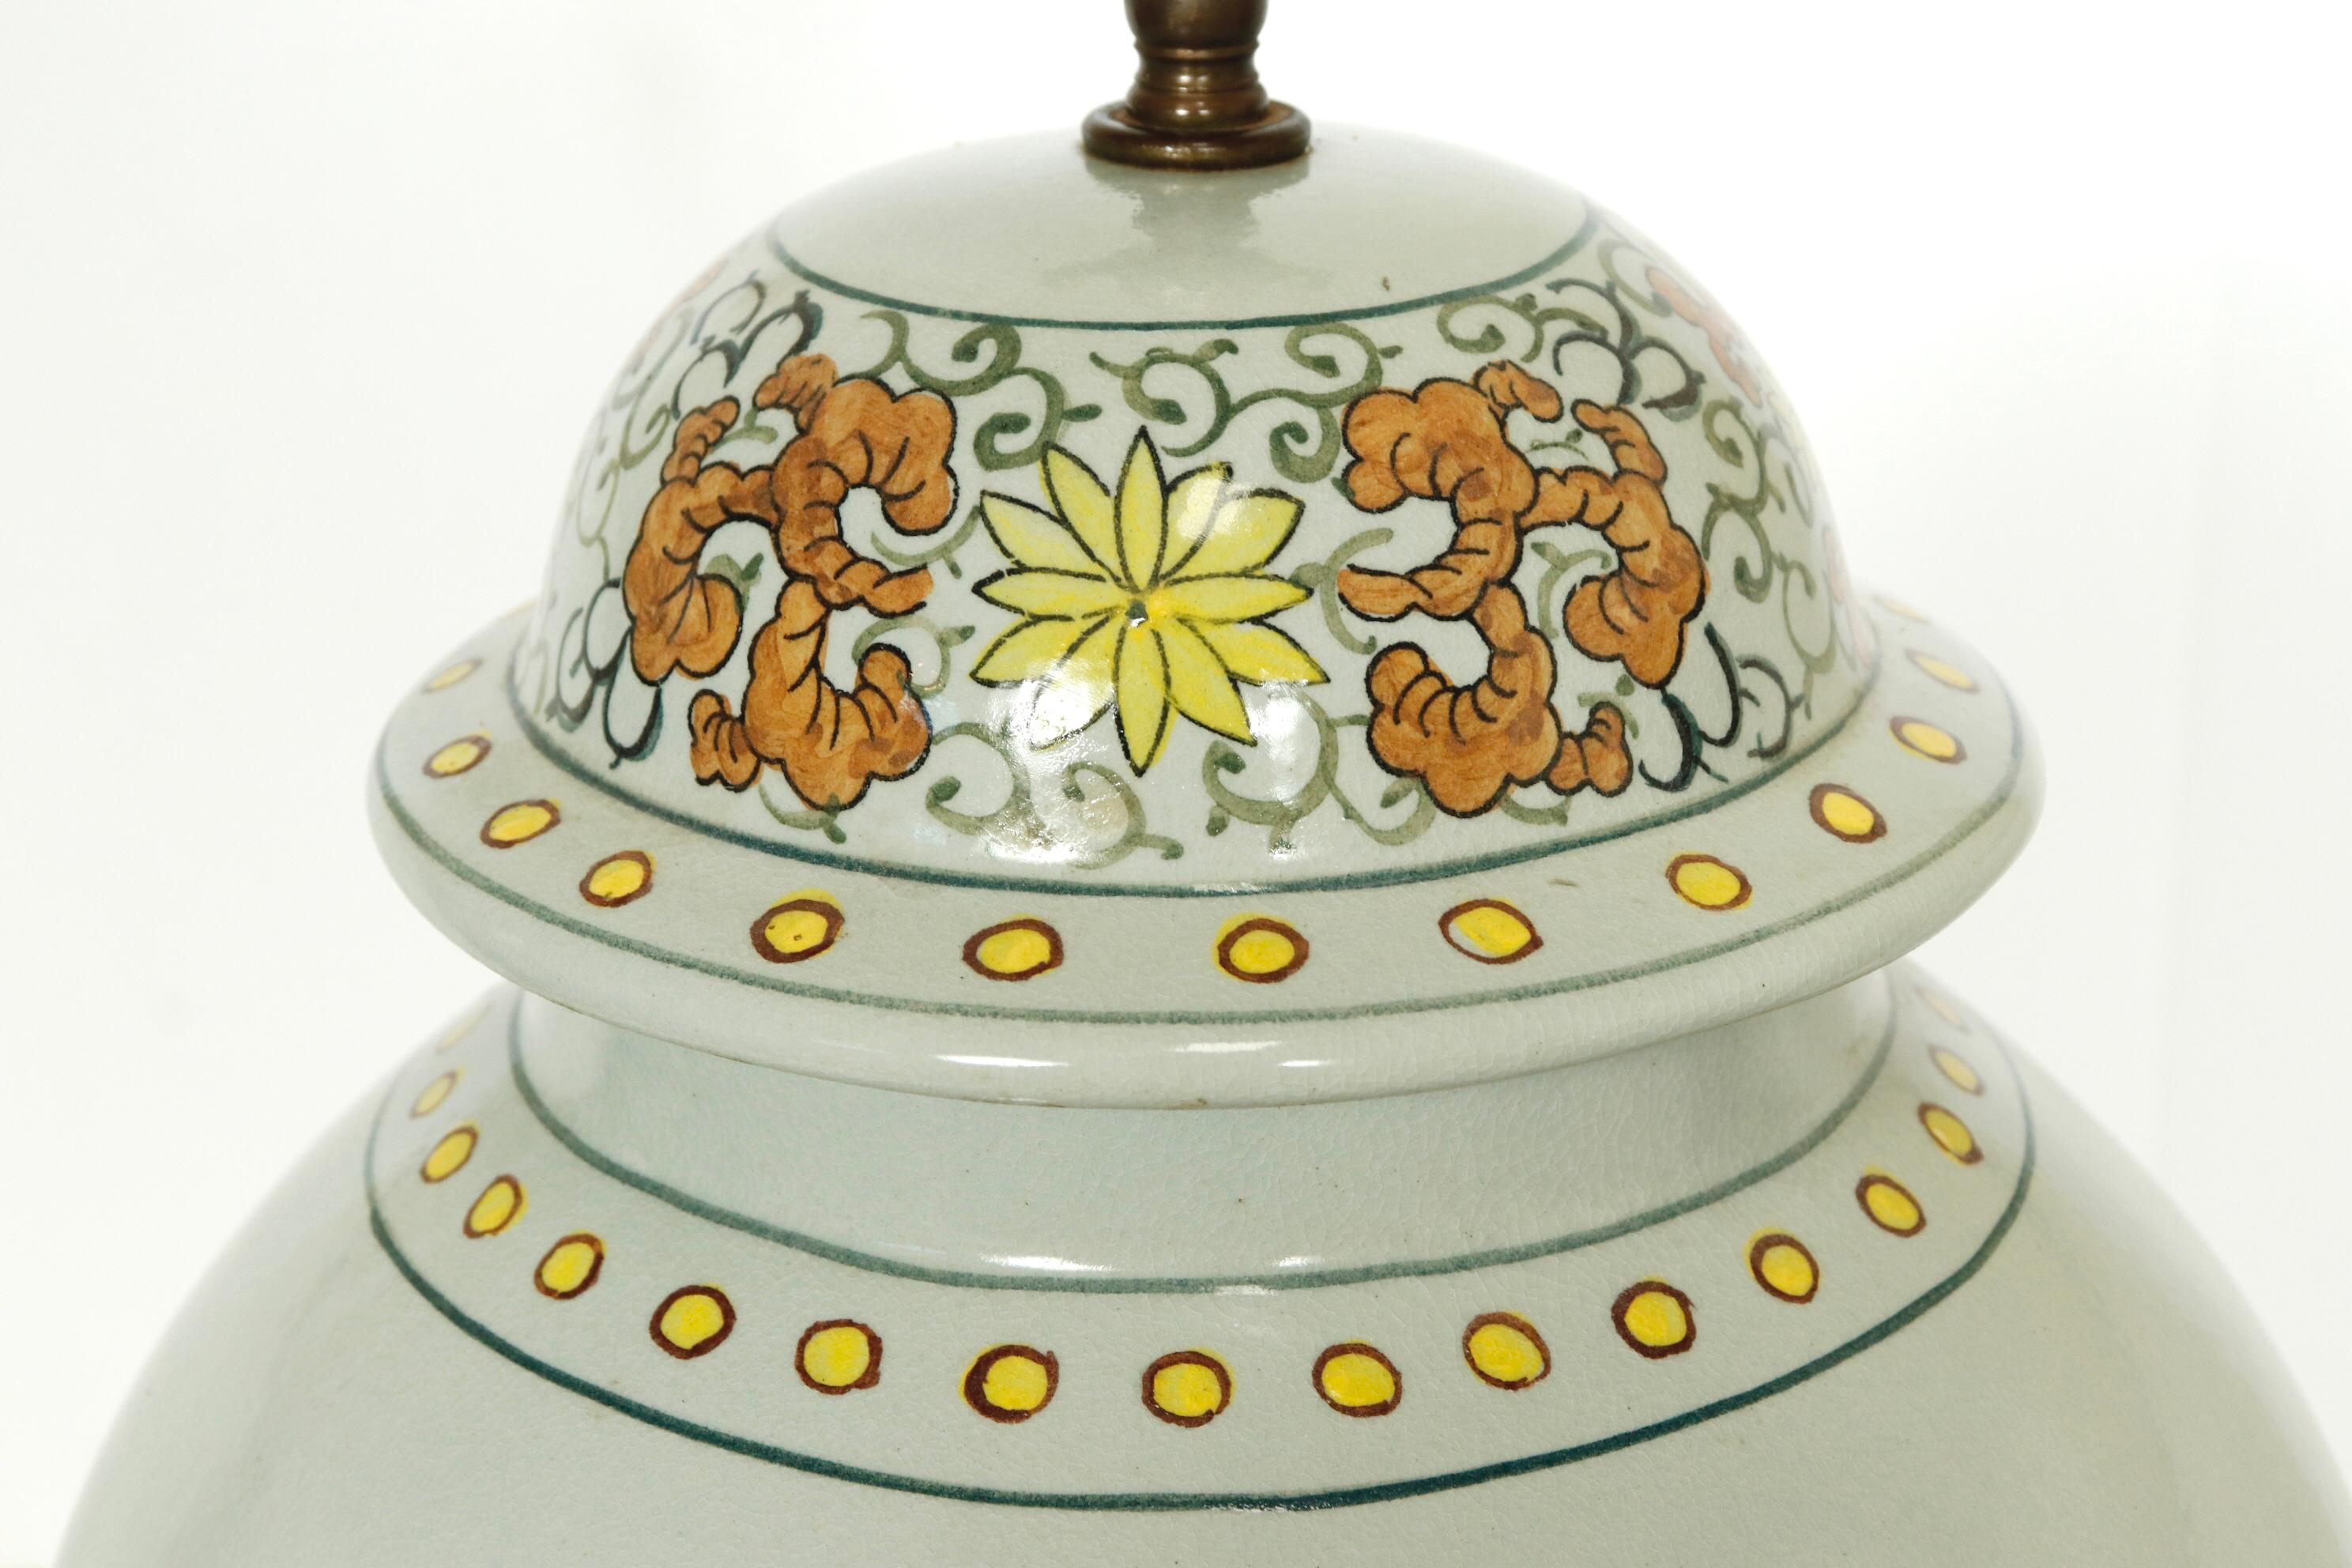 Antique porcelain ginger jar table lamp on dark stained wood base.

Features a multicolor pastel floral design.

Chinese, circa 1920.

Dimensions: 21” H to socket base x 10” W